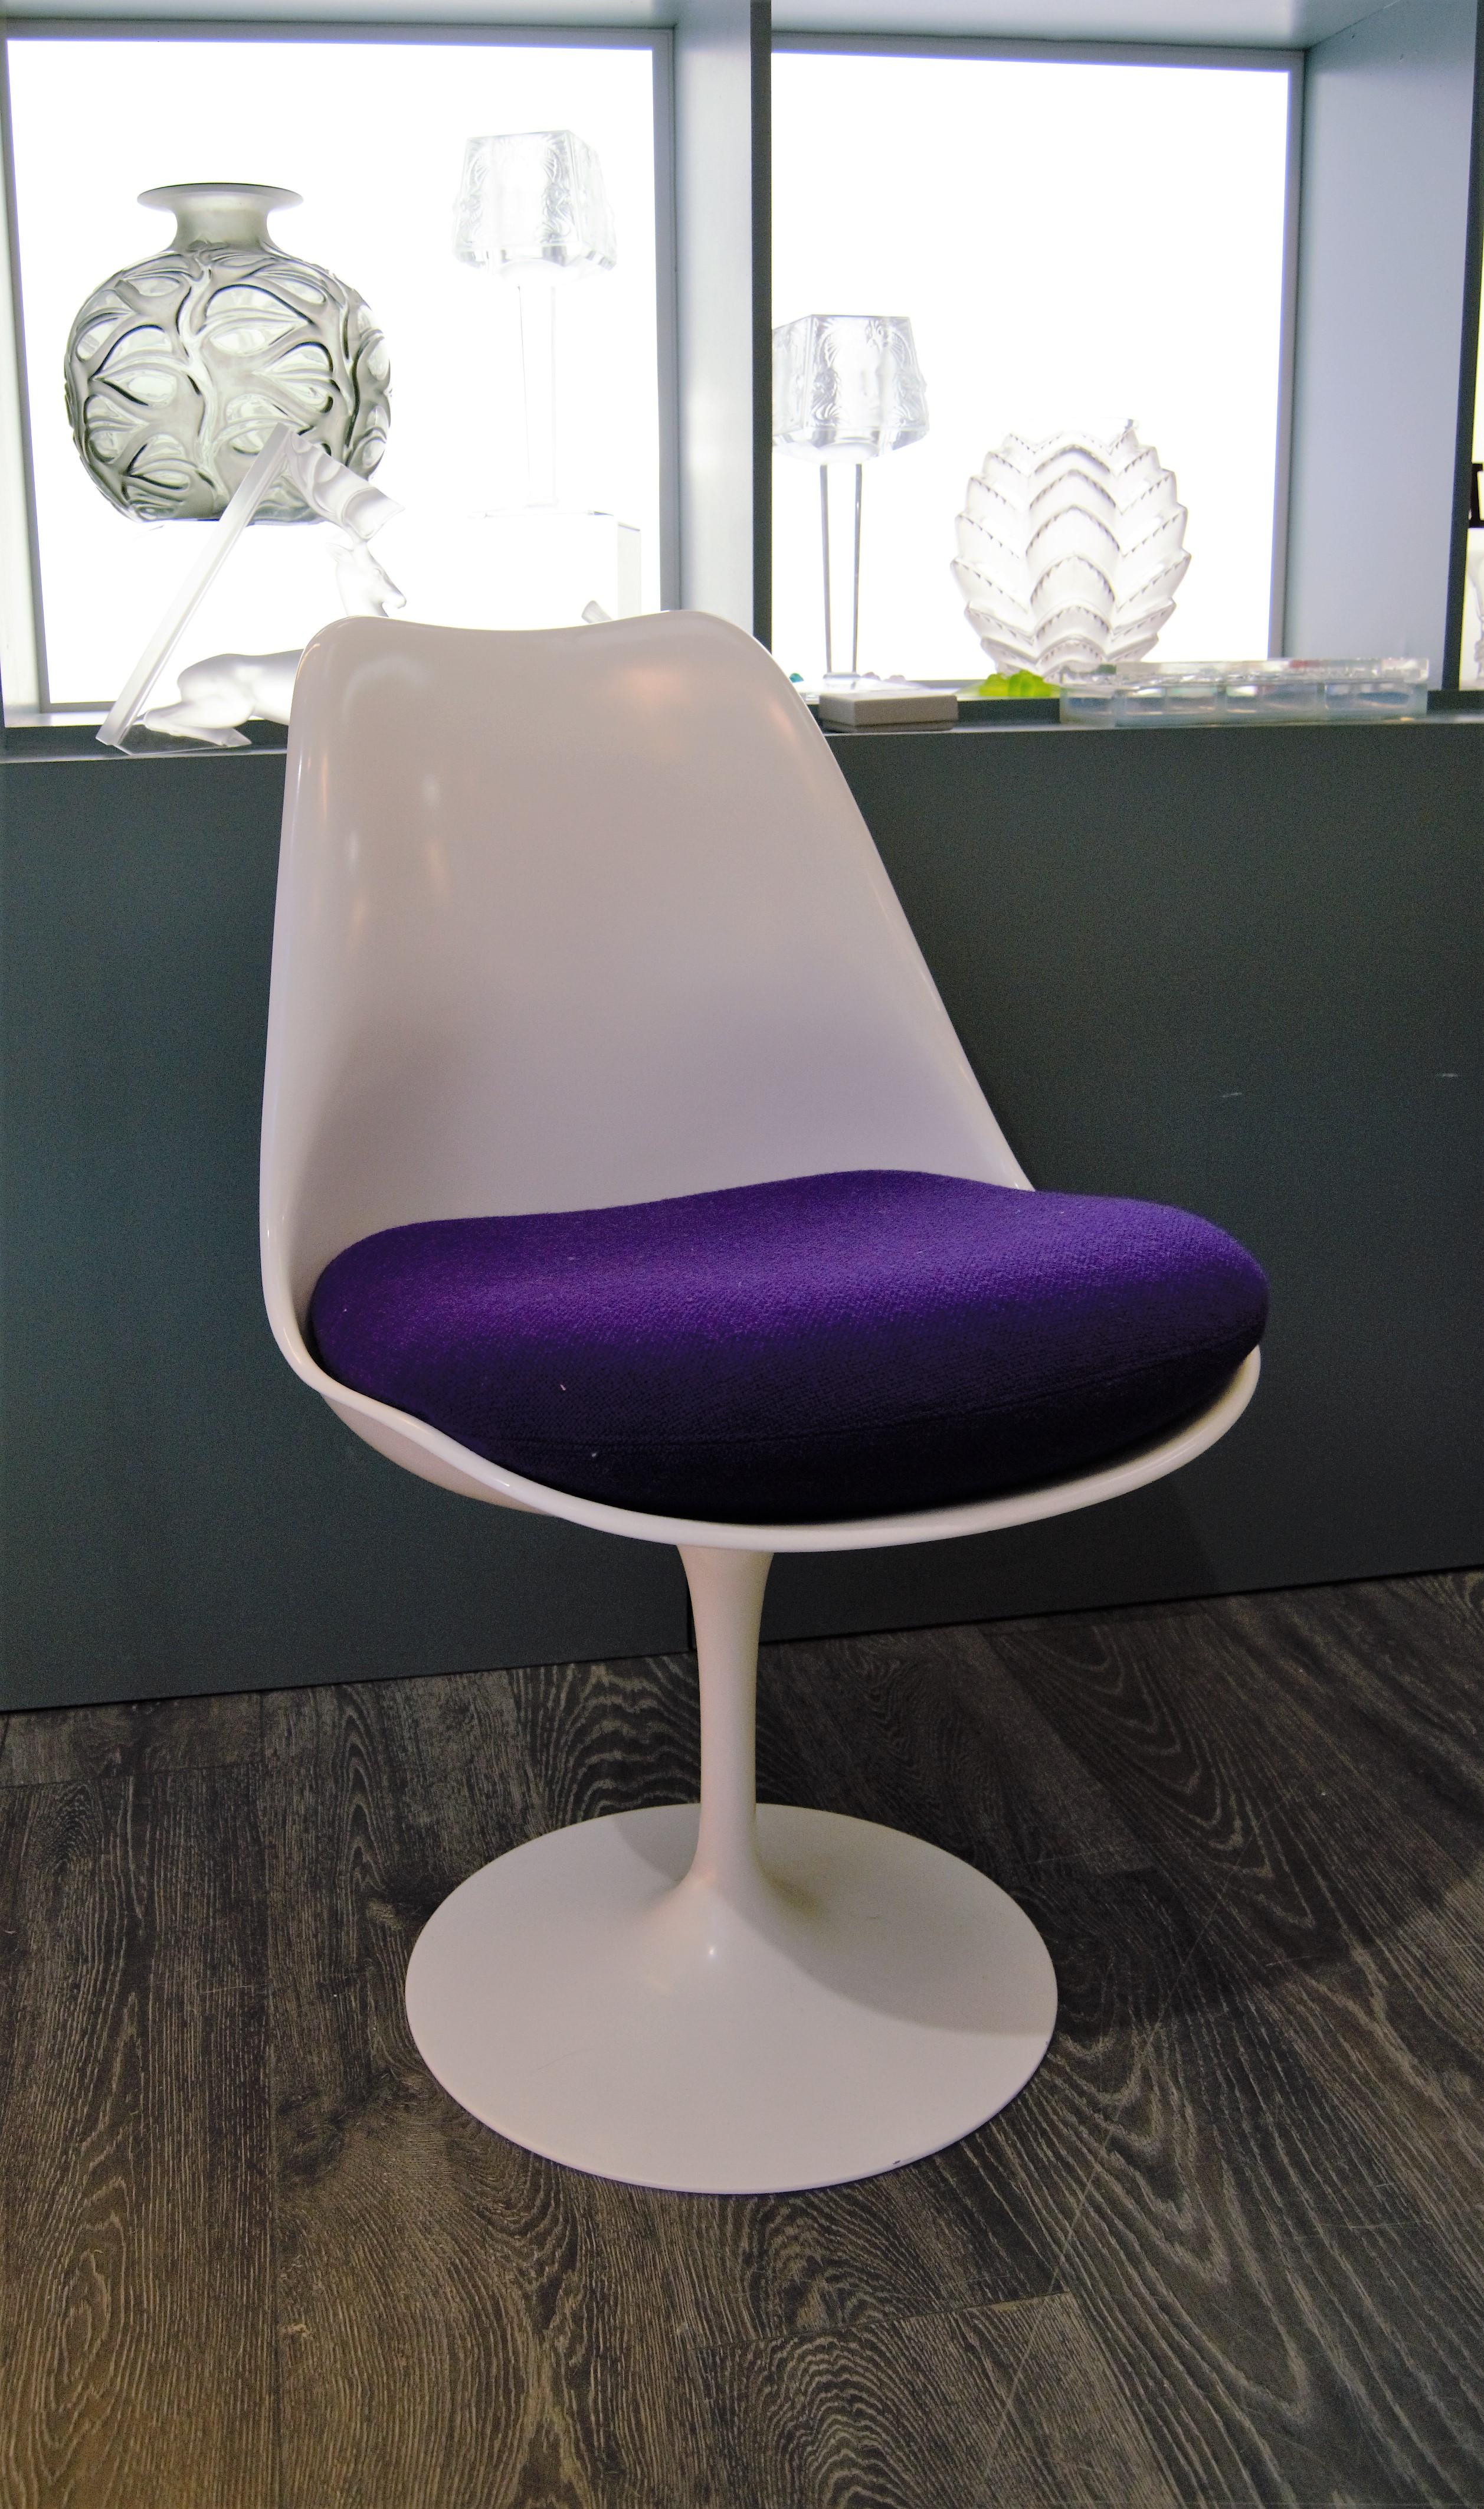 Eero Saarinen (1910-1961) and Knoll International

The tulip chair was designed by Eero Saarinen in 1955-1956 for the Knoll Company of New York City.

Chair model tulip - Knoll 
The shell is in white lacquered fiberglass, no rotating base in cast